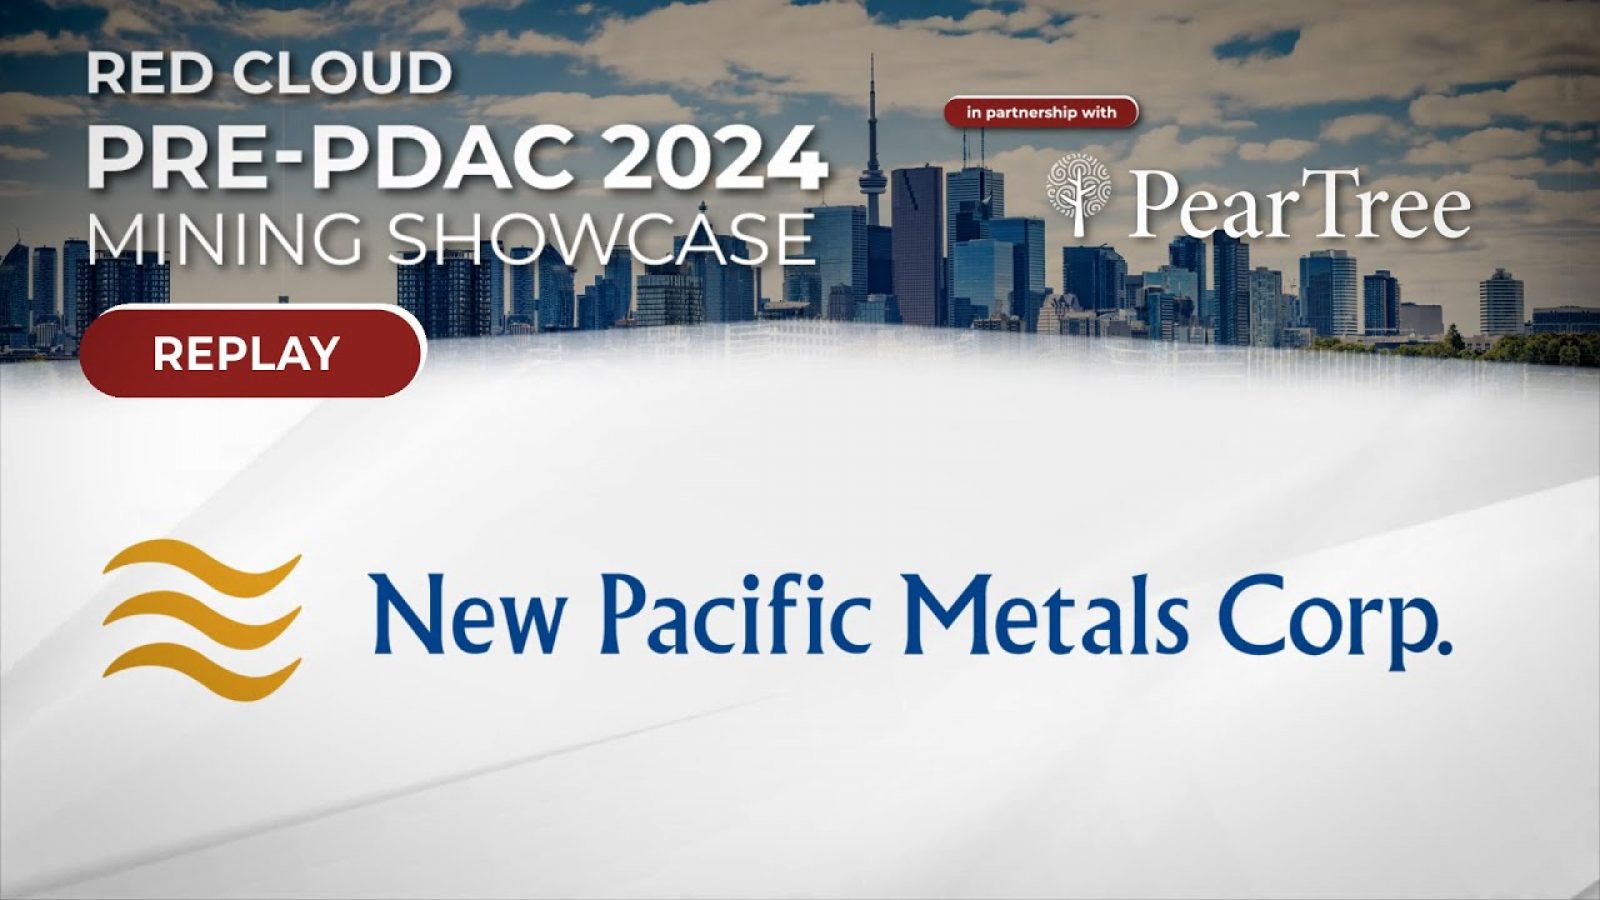 New Pacific Metals Corp